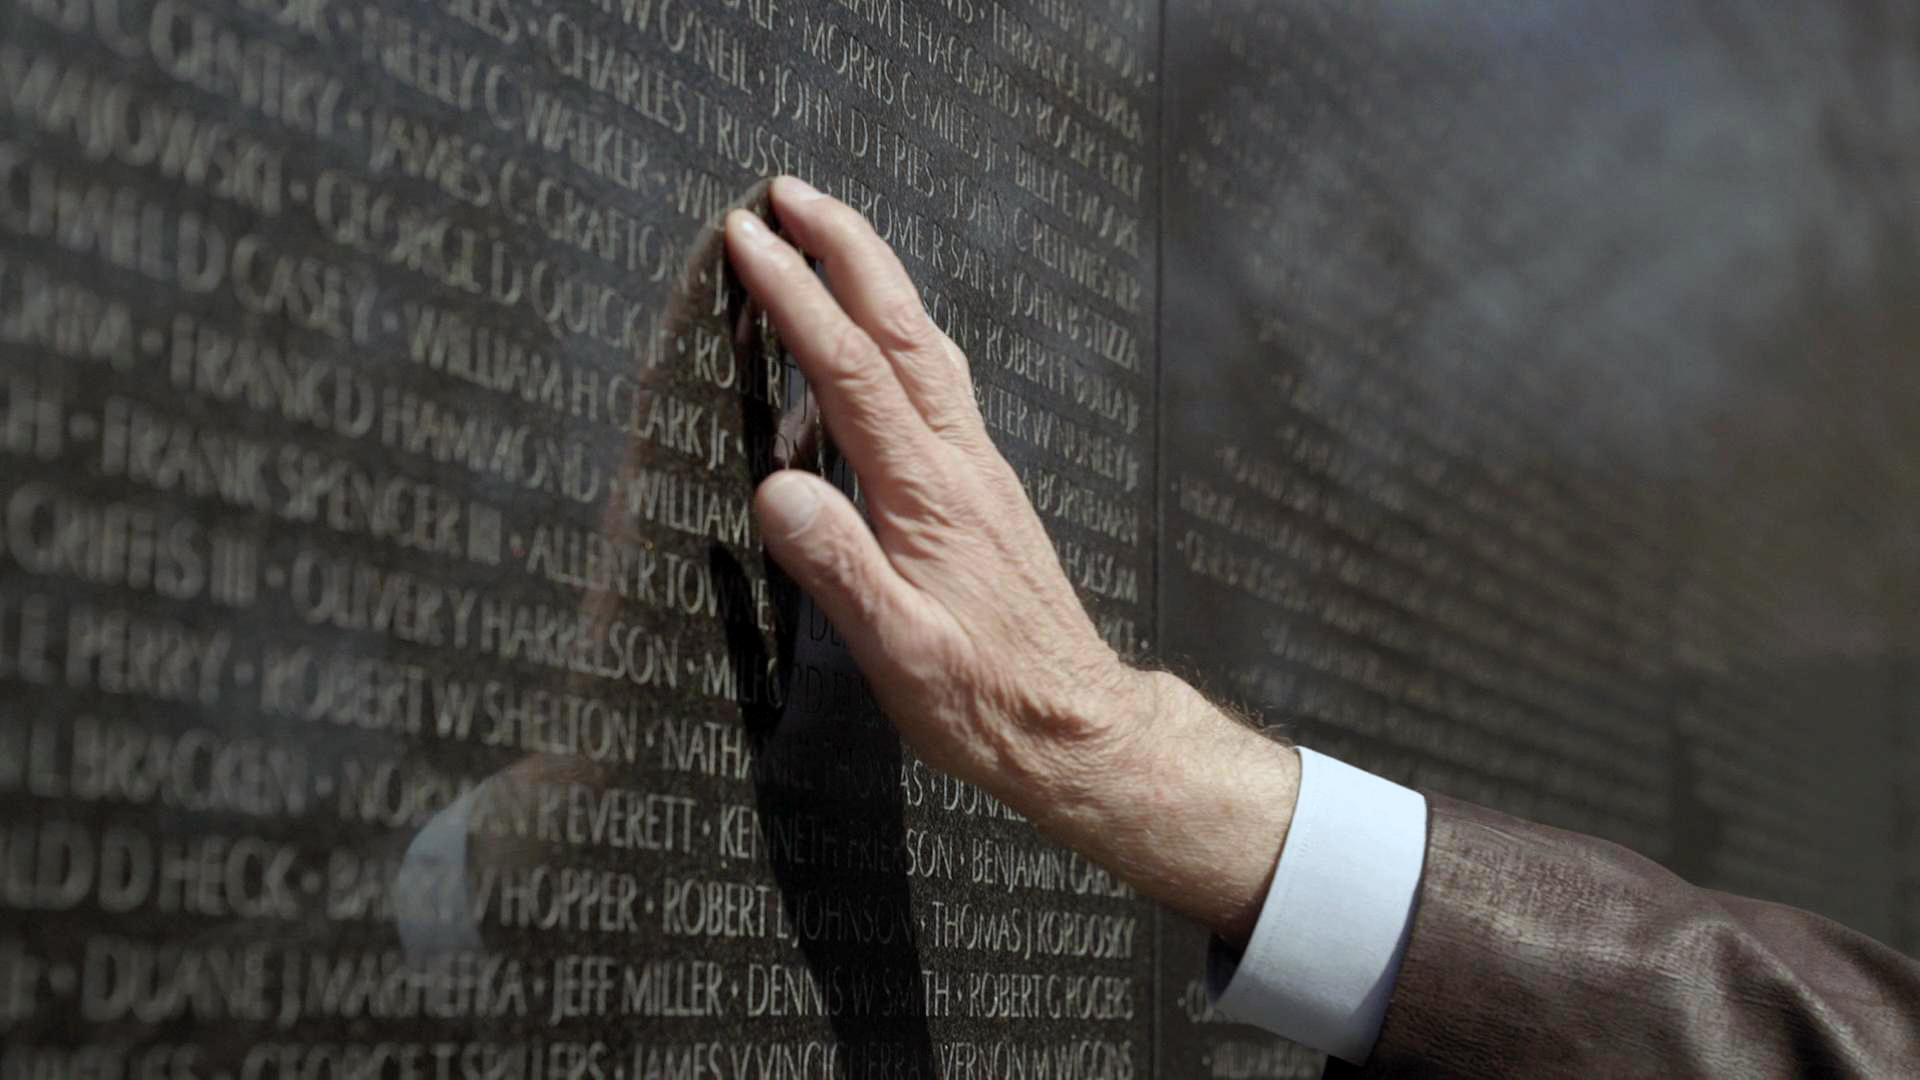 While the Vietnam Veterans Memorial and names provide an obvious visual reminder, Army Veteran Jan Scruggs wants people to know the story behind the memorial.